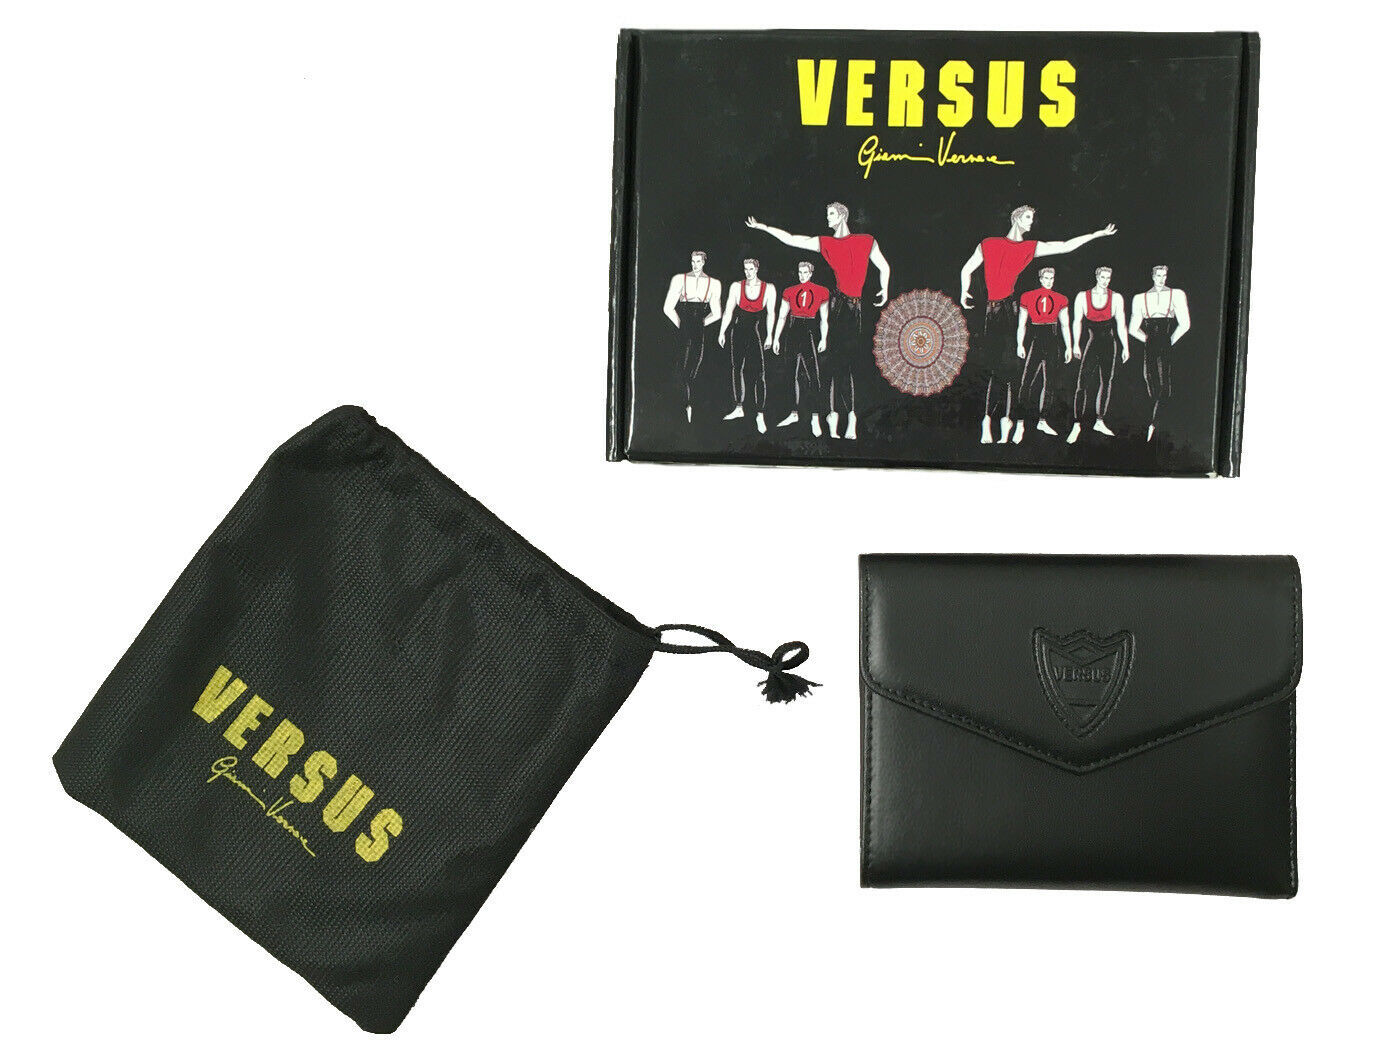 NEW IN BOX Vintage 90's Gianni Versace Versus Card Case Wallet!   Black Leather - $179.99